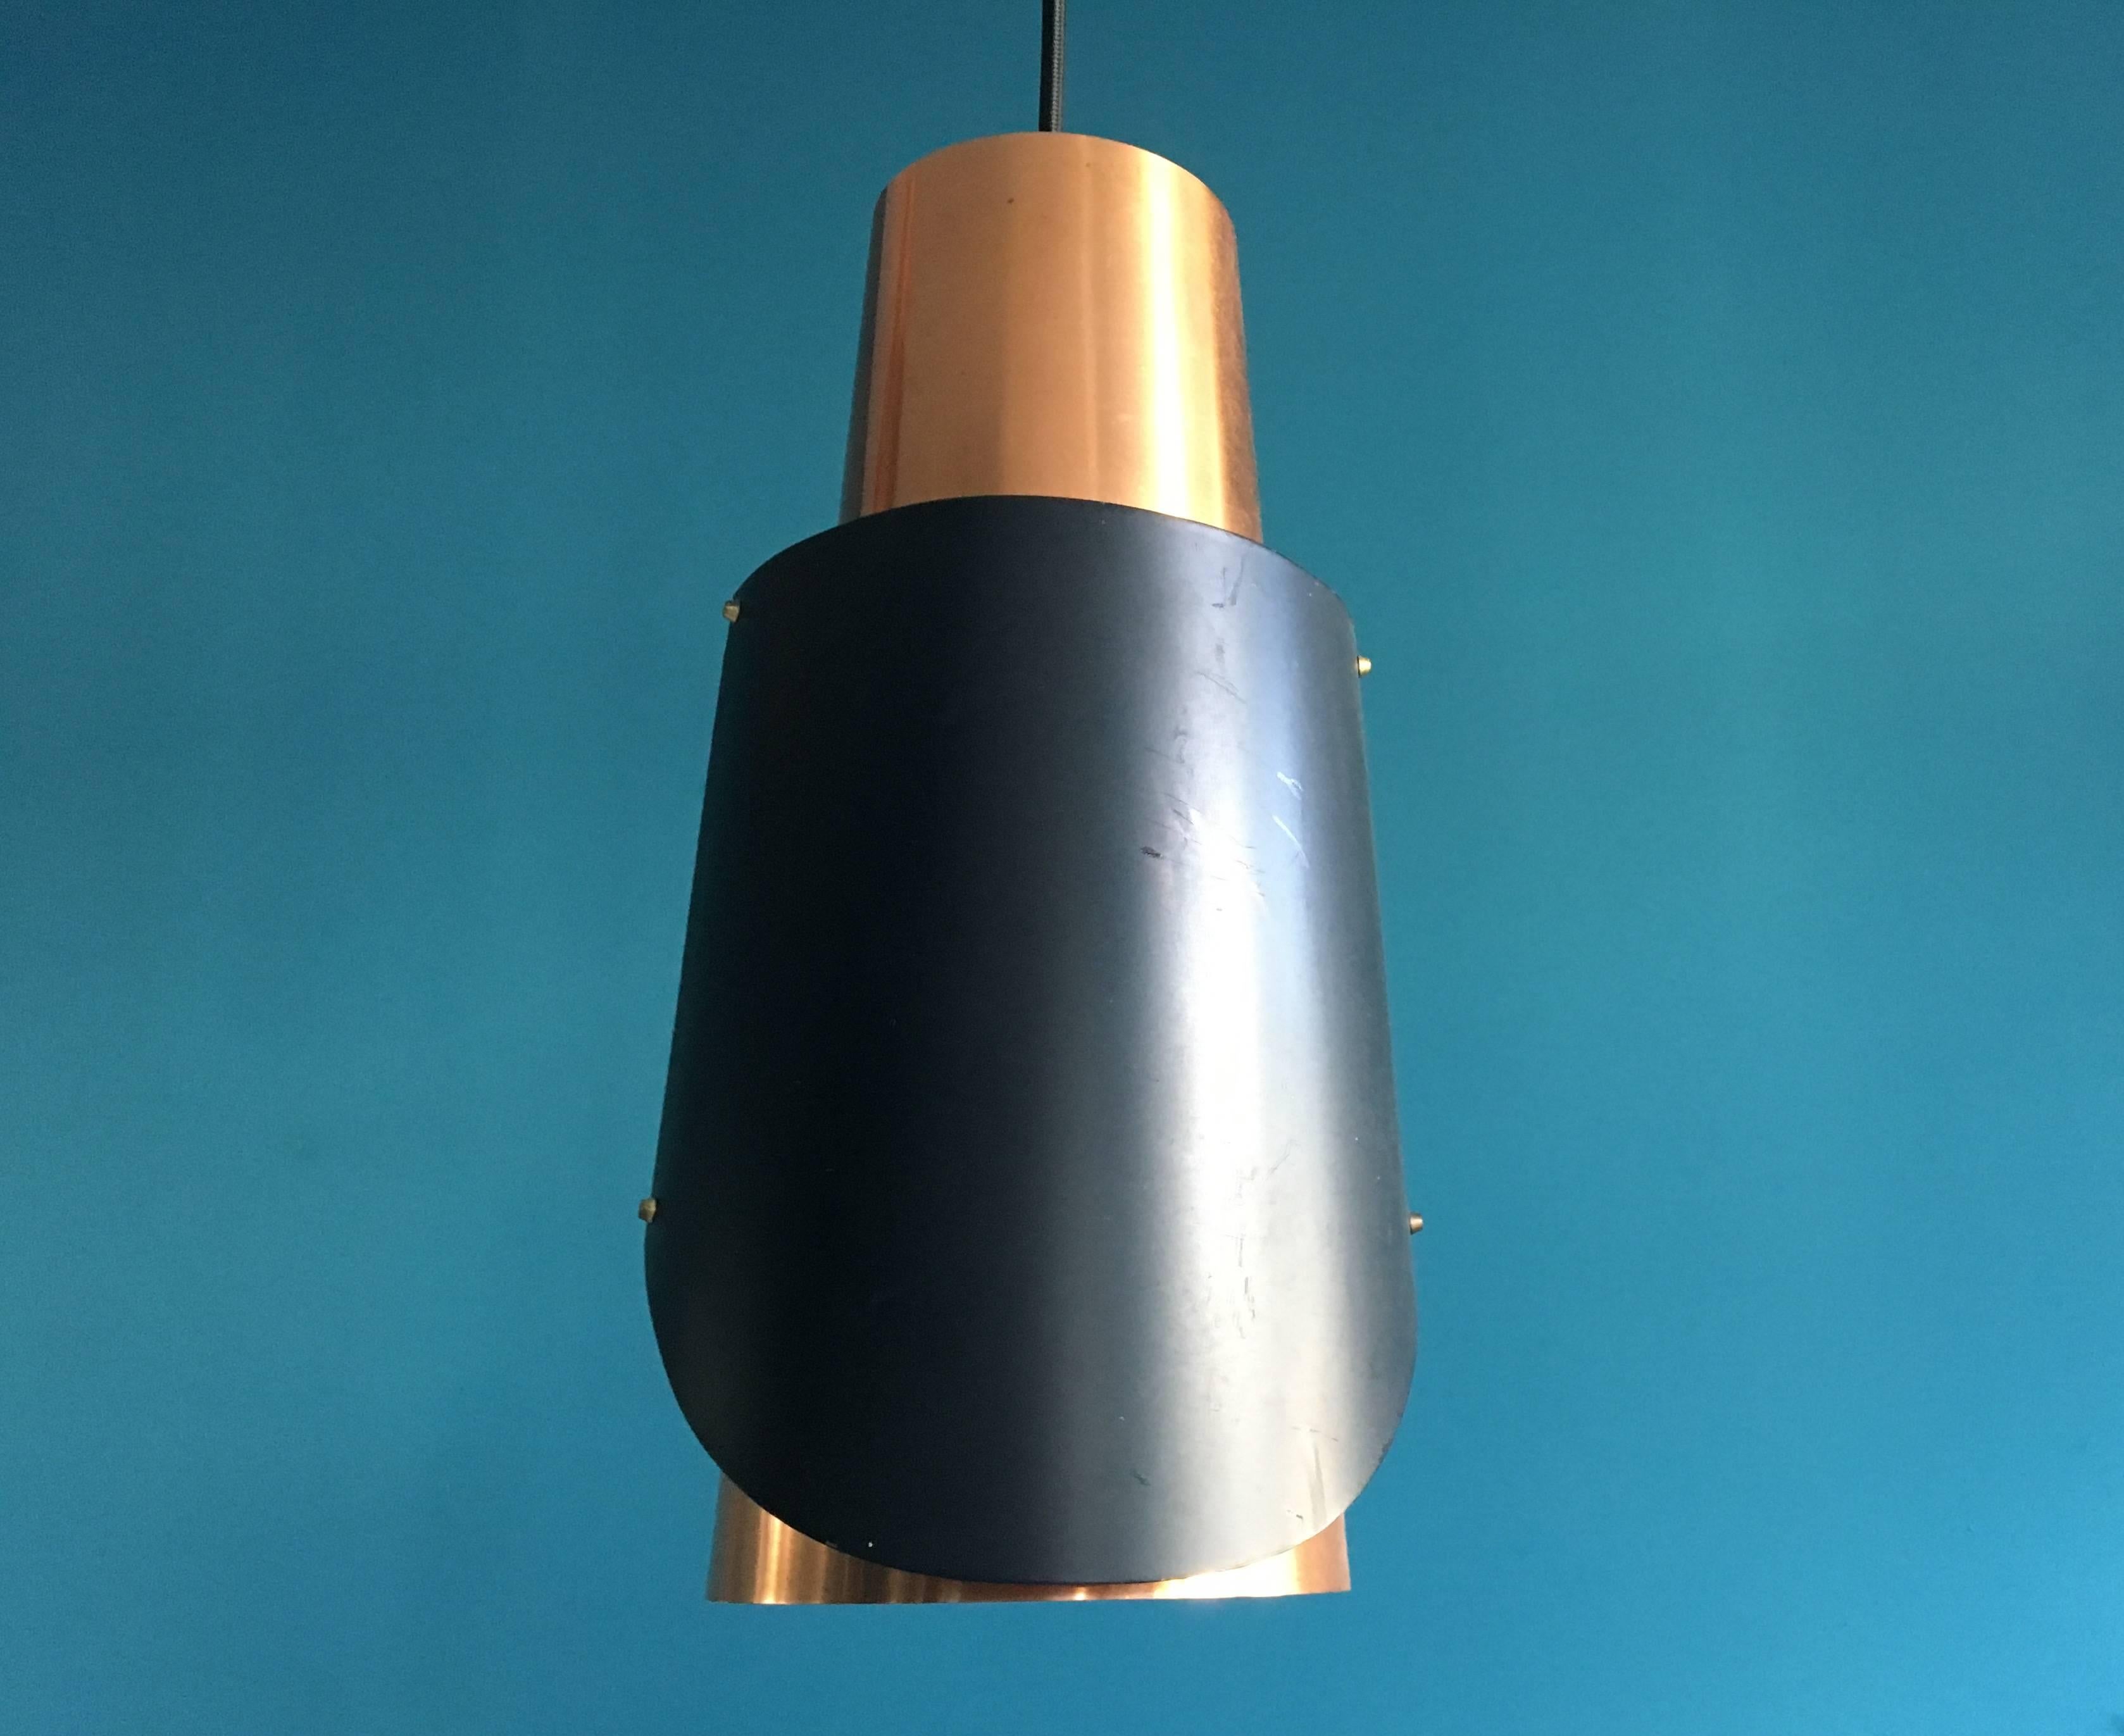 This pair of copper pendant lights was designed by Bent Karlby and produced by Danish company Lyfa in the 1960s. The model is called "Østerport" and is quite rare. The lamp shades are made of thin copper and lacquered metal. The lamps are